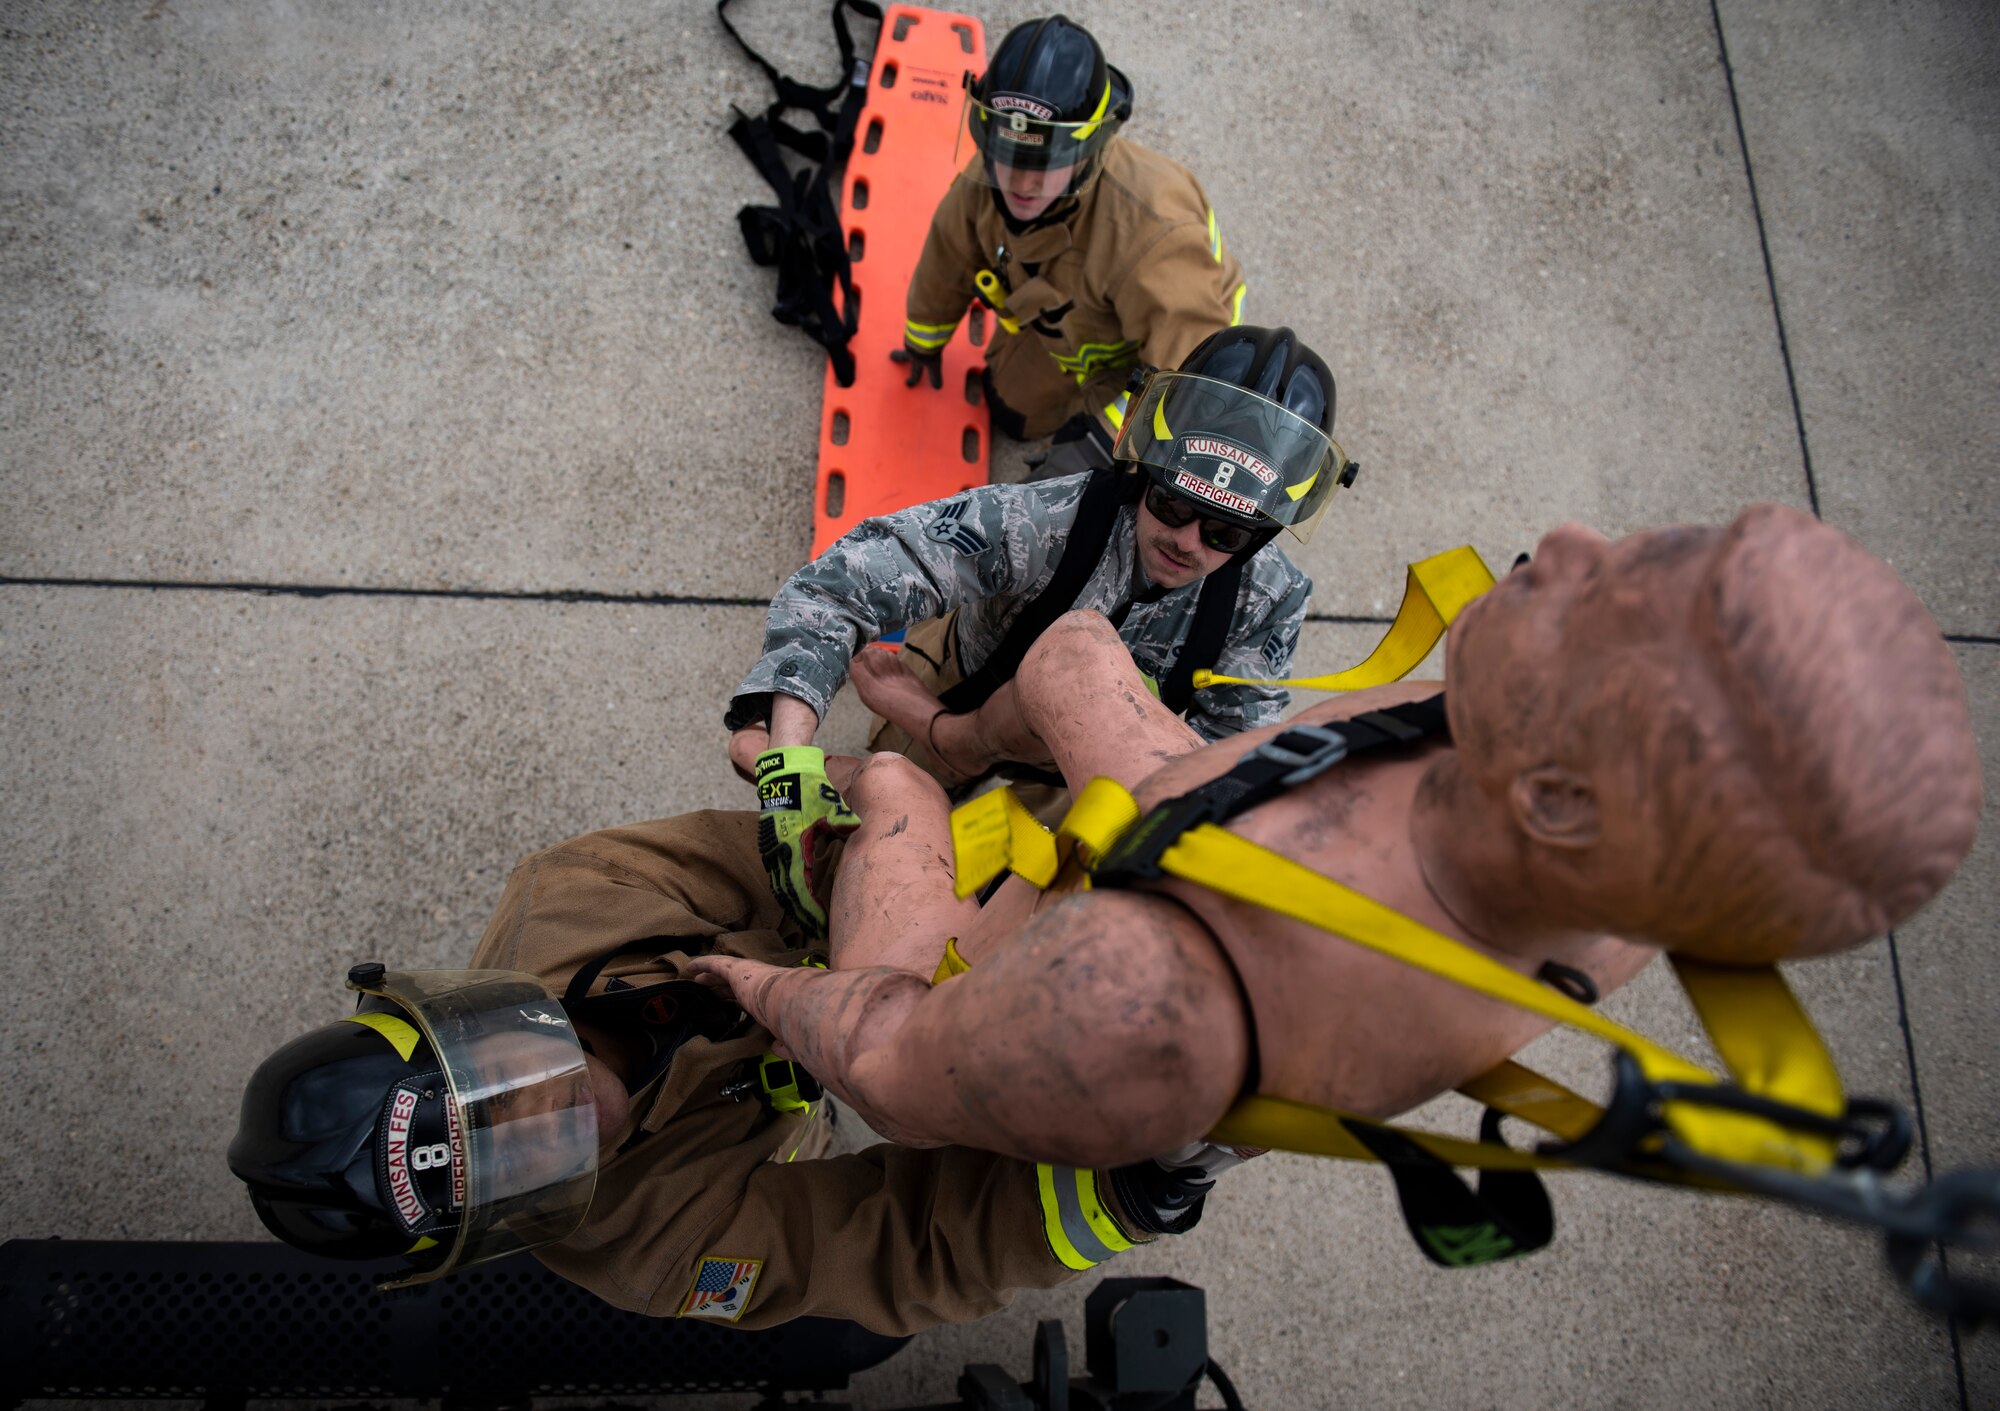 Fire fighters from the 8th Civil Engineer Squadron rescue a mannequin simulating a fall victim at Kunsan Air Base, Republic of Korea, March 26, 2019. This was the first time the fire department exercised retrieving someone hanging in a harness from an aircraft cargo loader. (U.S. Air Force phot by Senior Airman Stefan Alvarez)